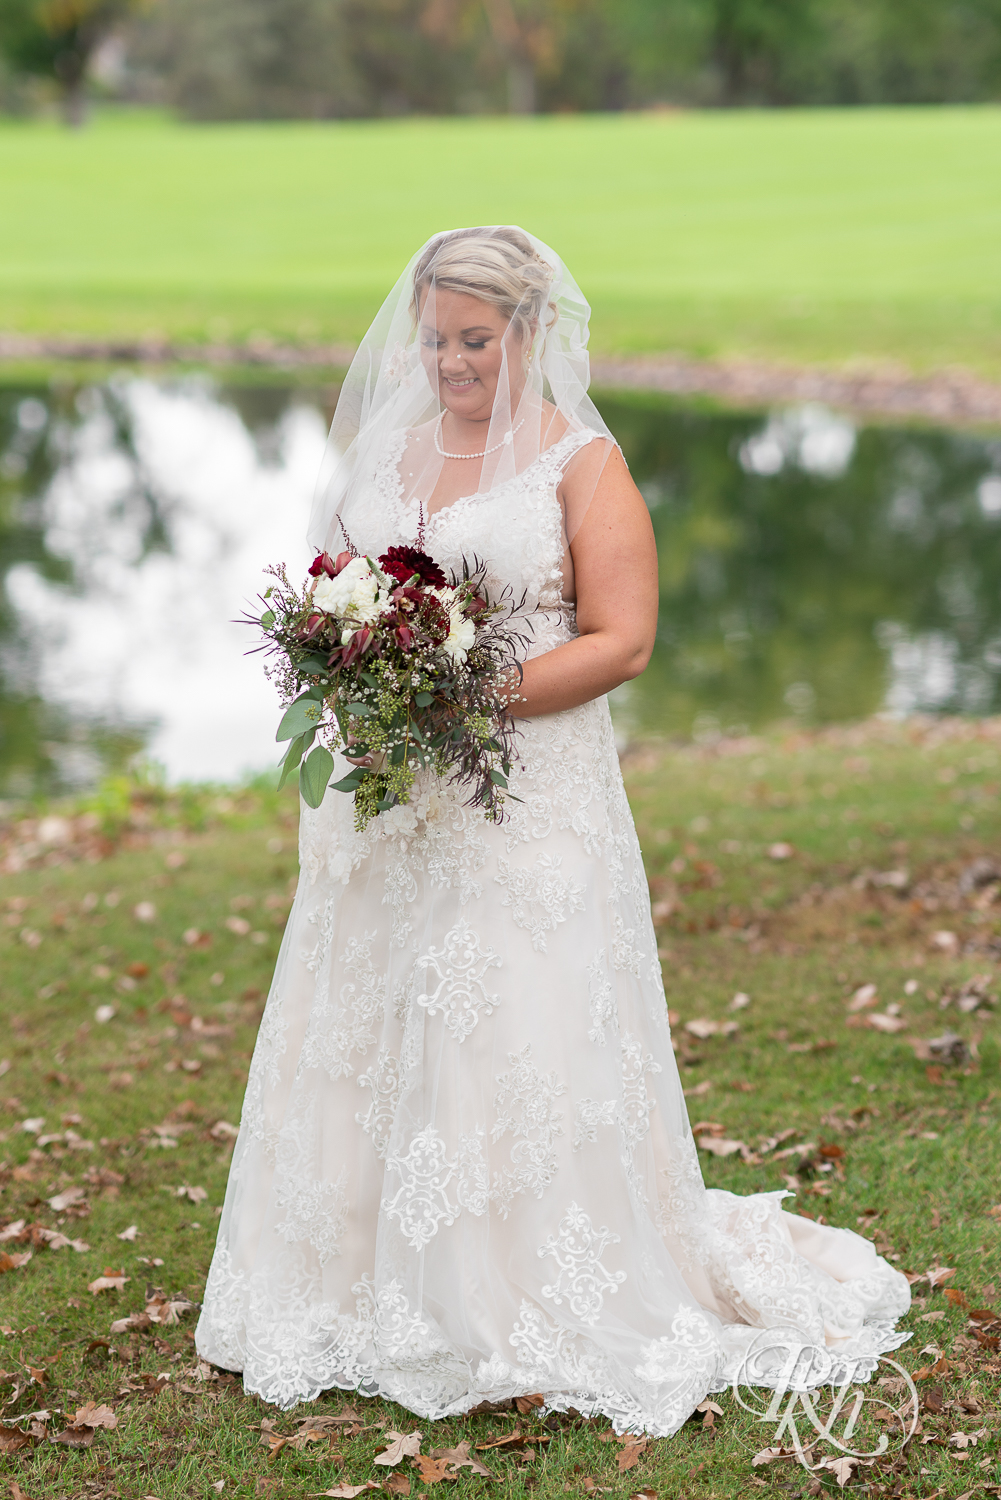 Bride under veil holds red and white flowers at Hastings Golf Club in Hastings, Minnesota.